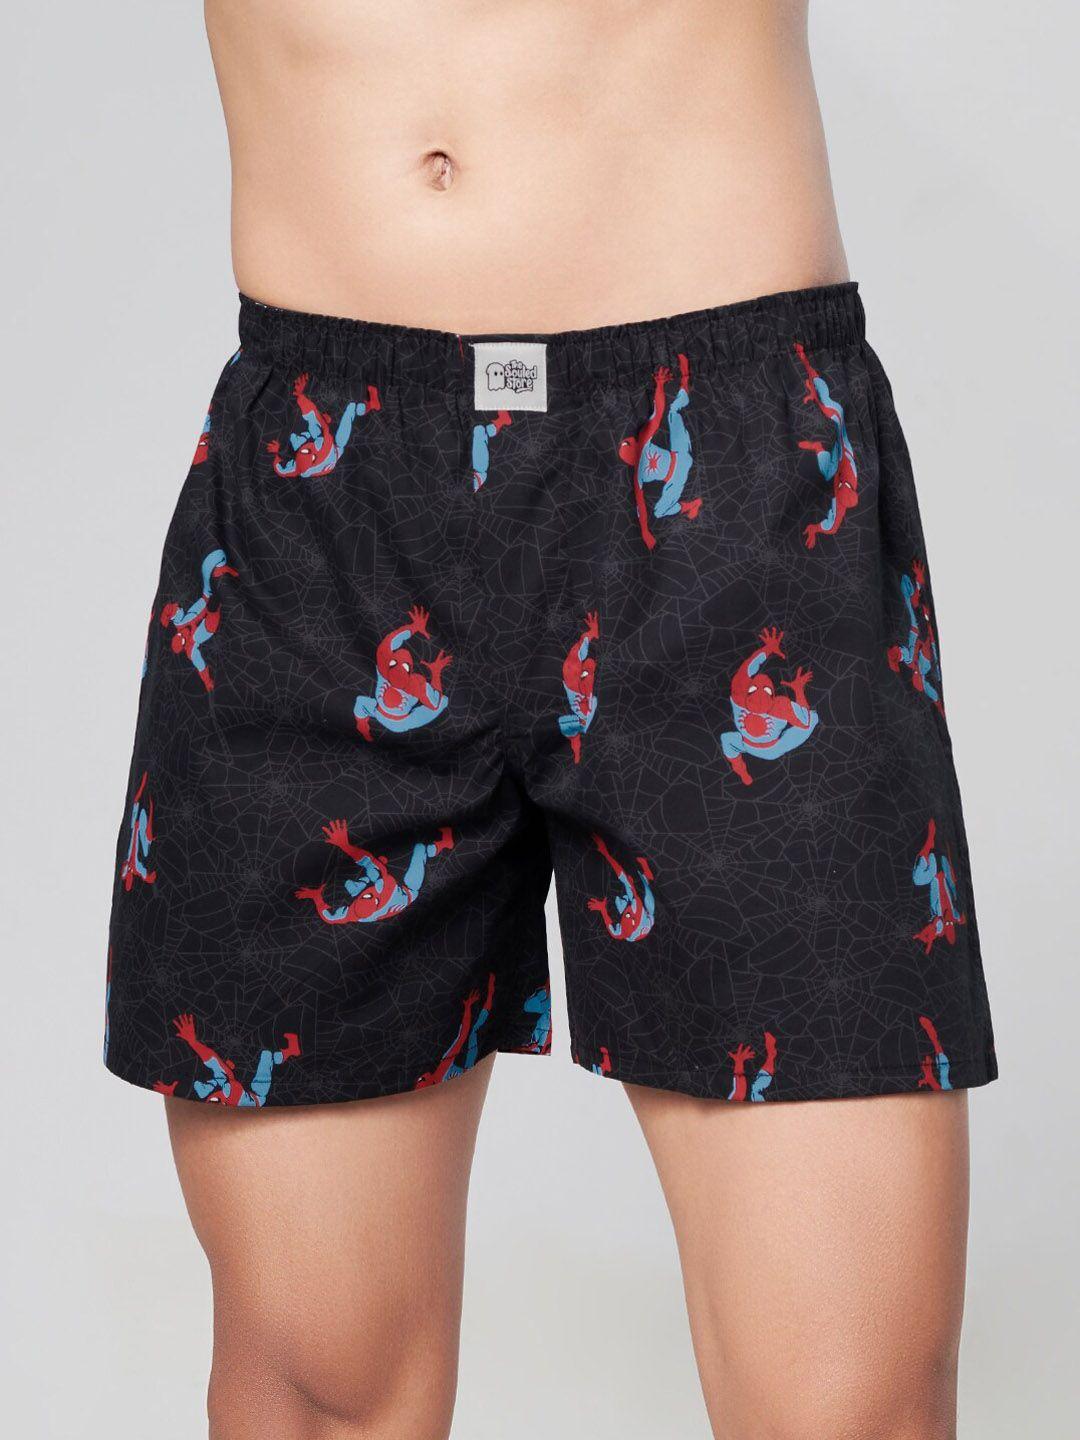 the-souled-store-men-black-spider-man-printed-pure-cotton-boxers